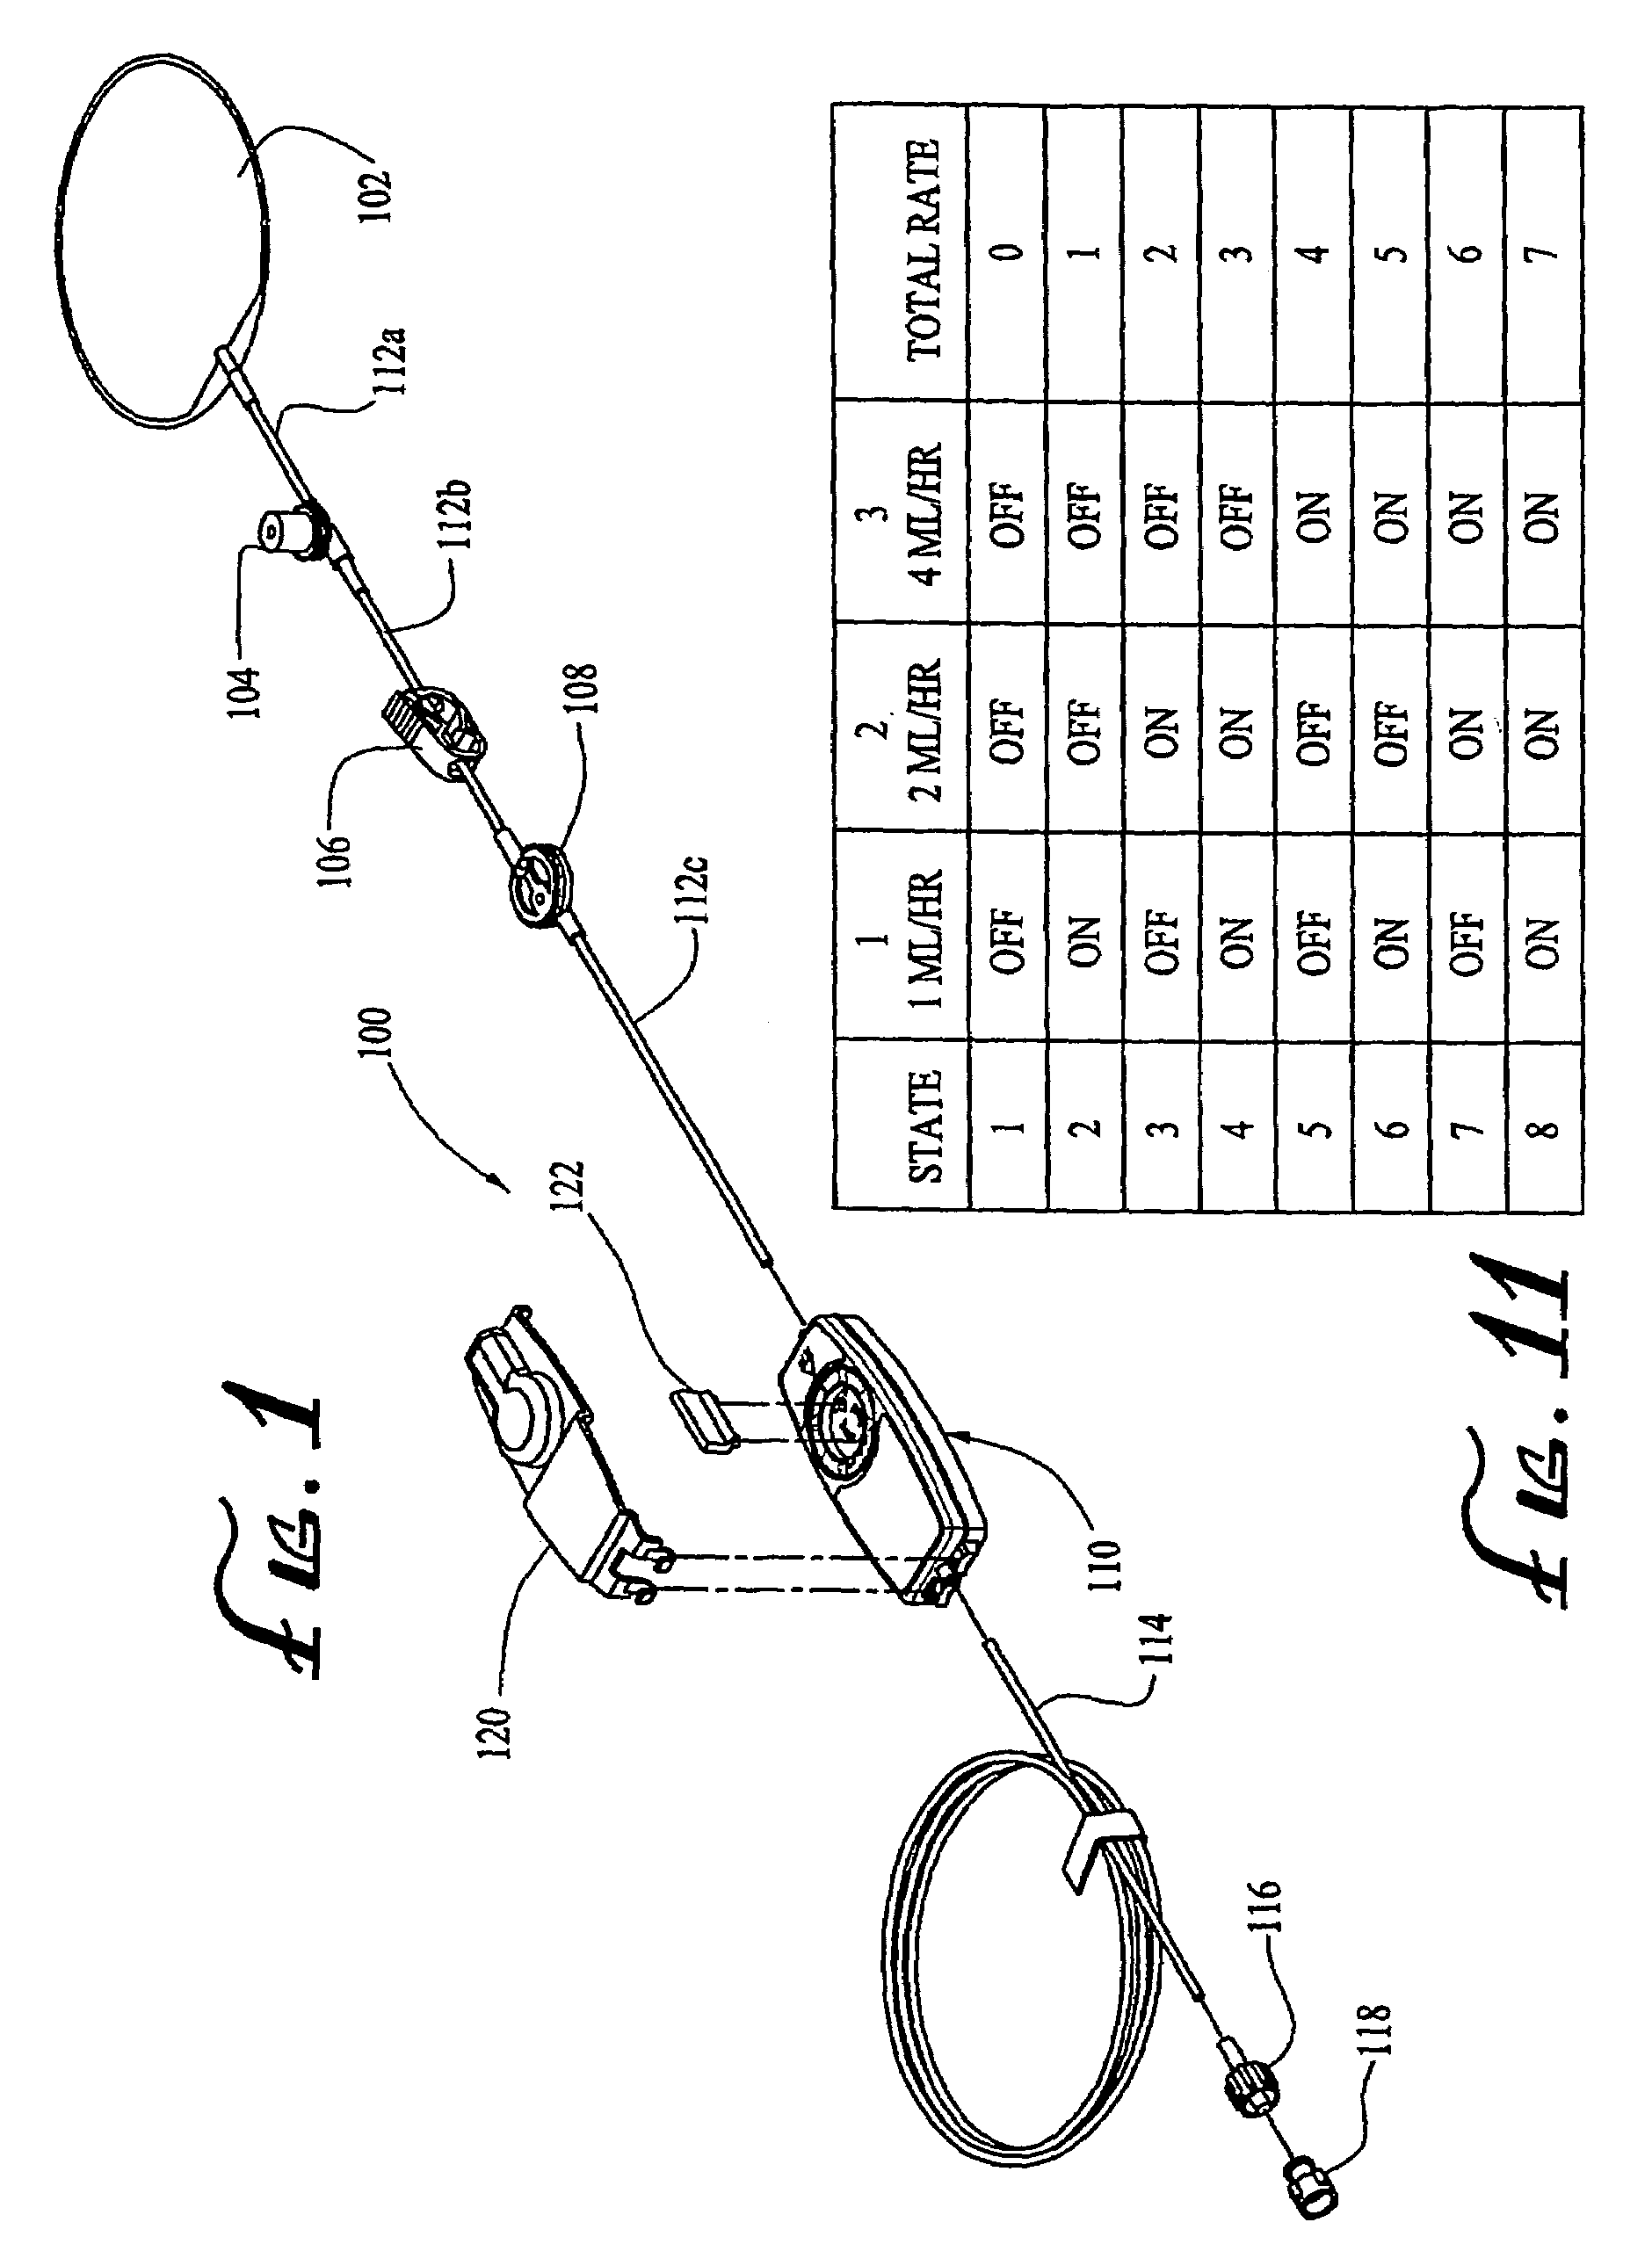 Device for selectively regulating the flow rate of a fluid